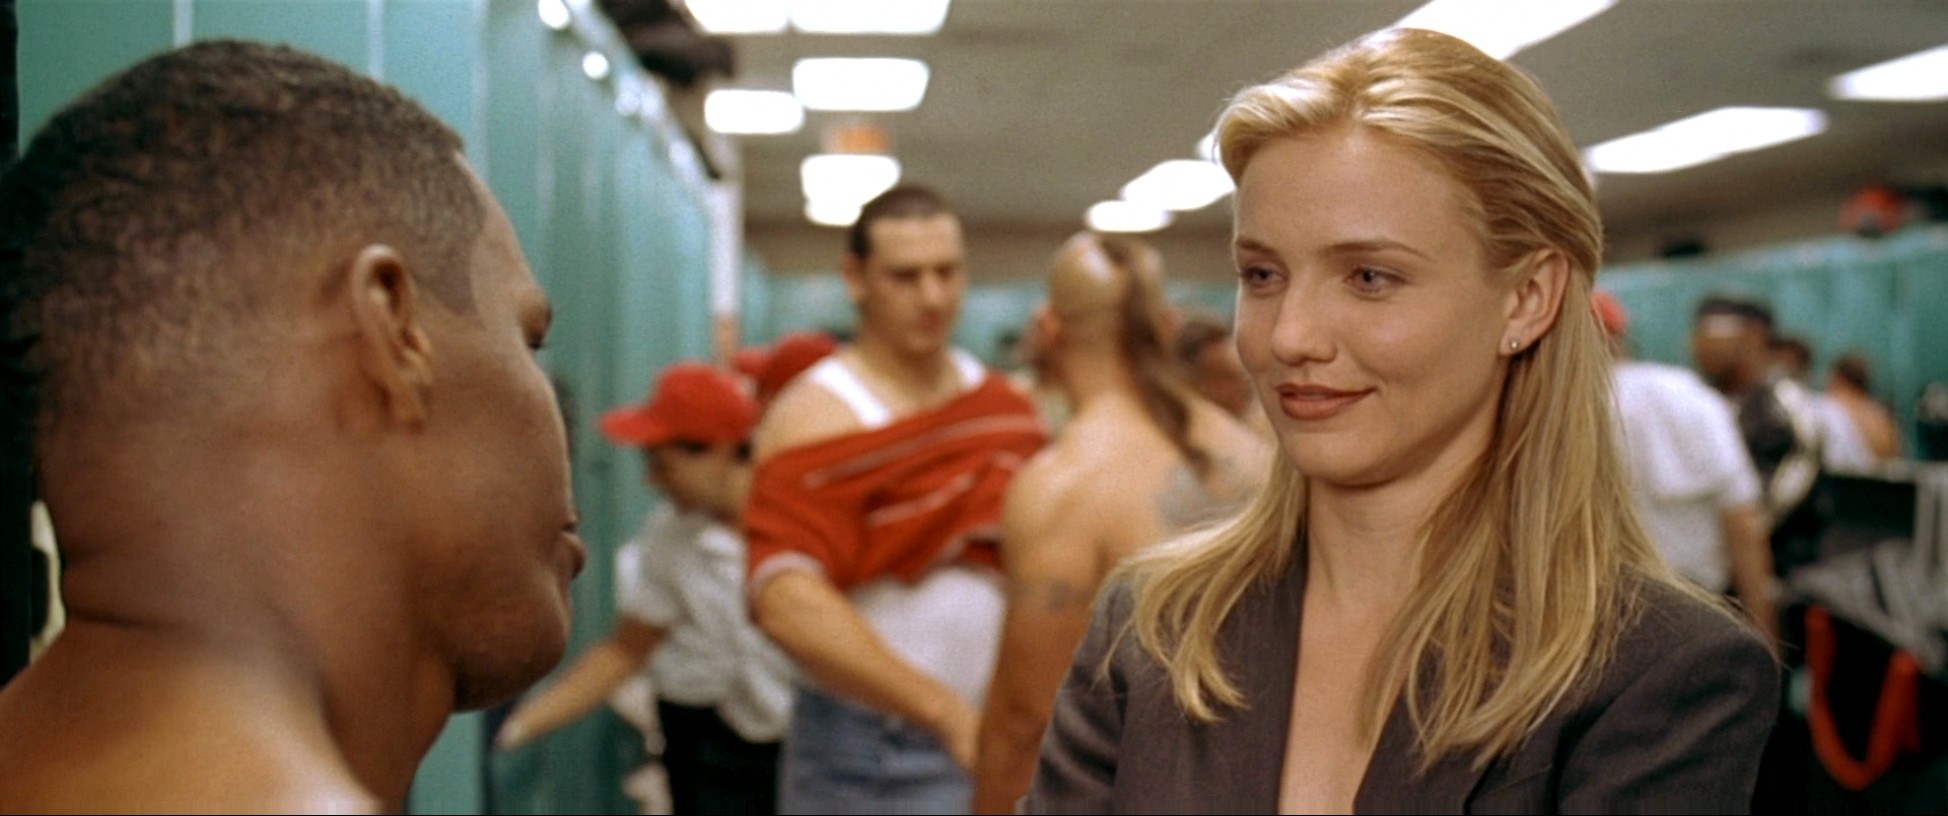 Cameron Diaz Movies: Charlie's Angels, The Mask, and More!